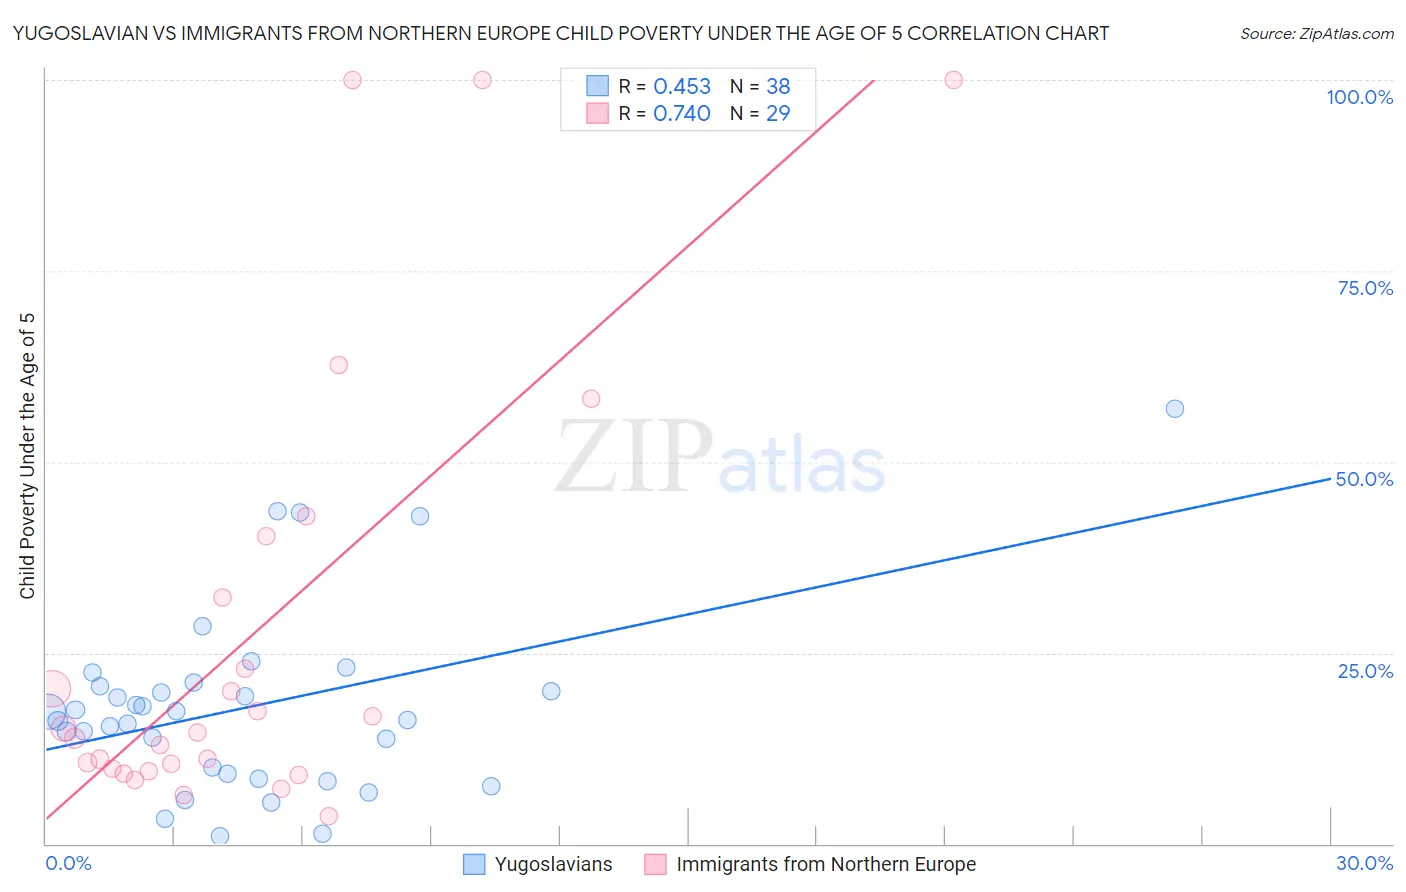 Yugoslavian vs Immigrants from Northern Europe Child Poverty Under the Age of 5